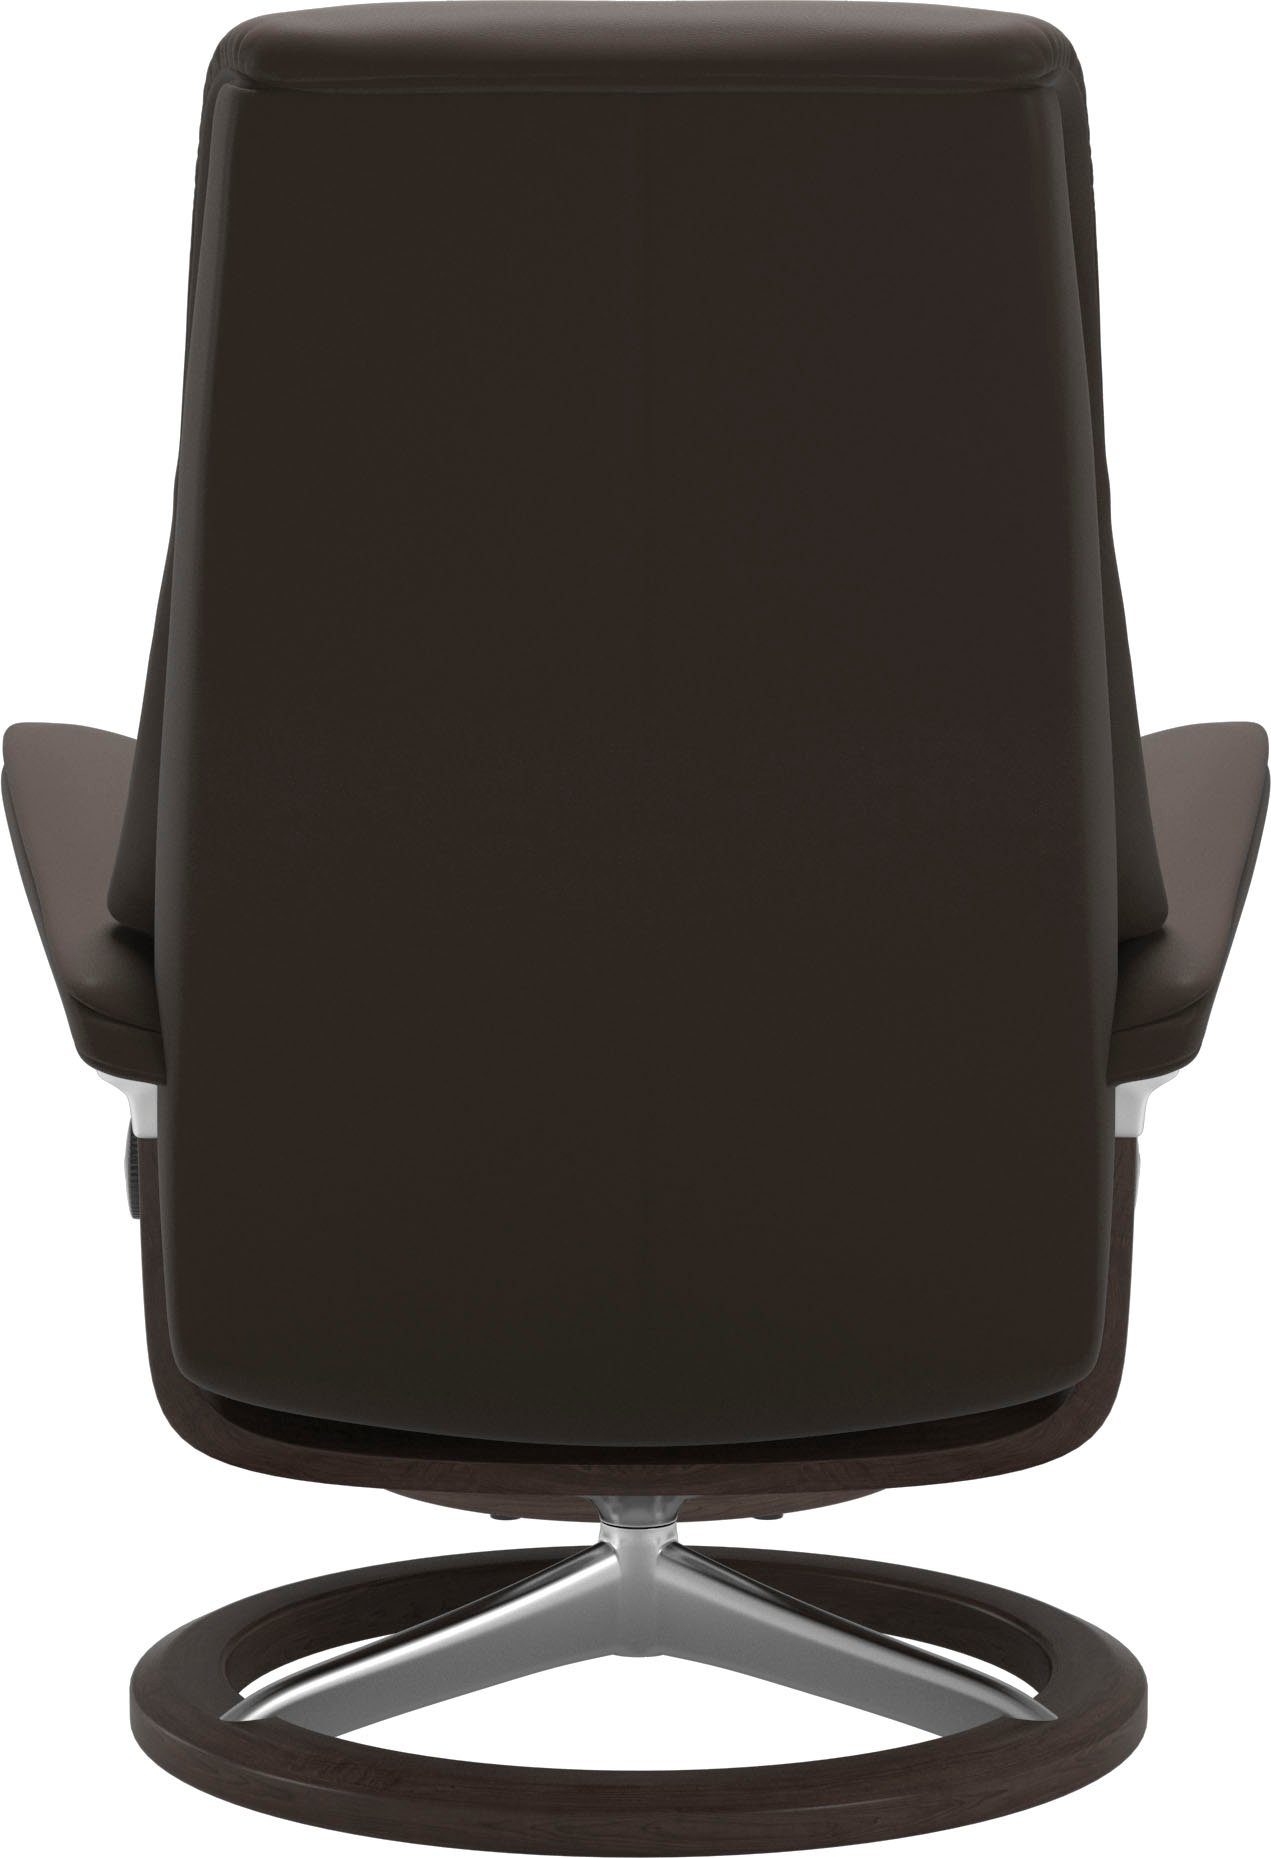 Wenge View, Relaxsessel Größe mit Signature Stressless® L,Gestell Base,